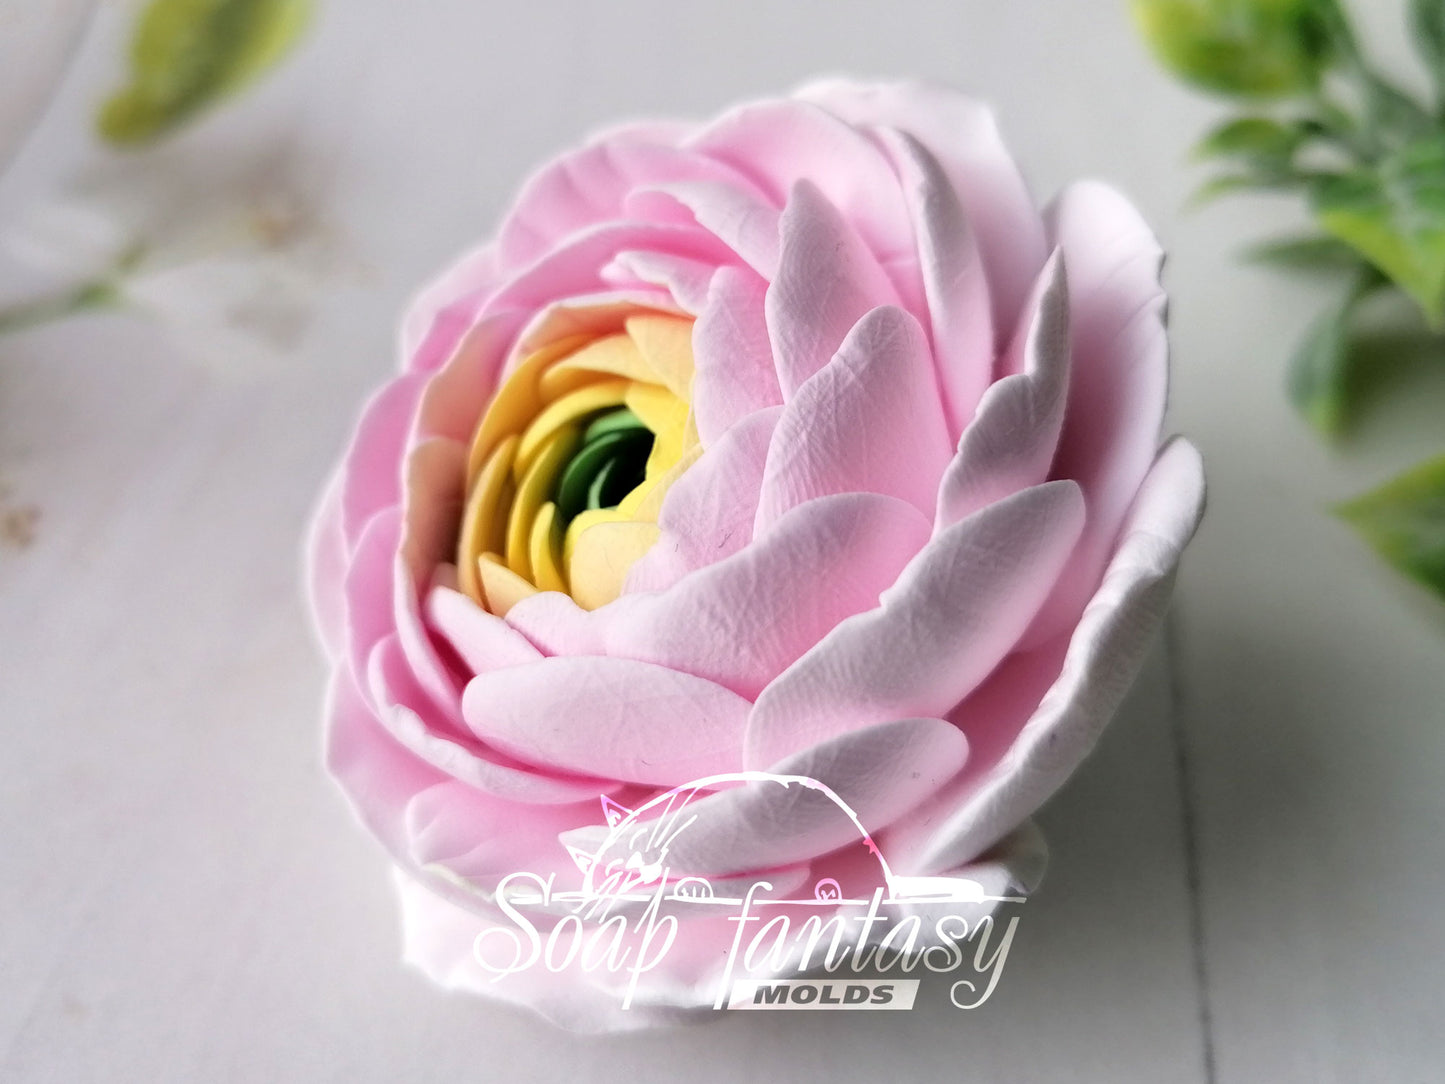 Ranunculus "Pink princess" flower silicone mold for soap making